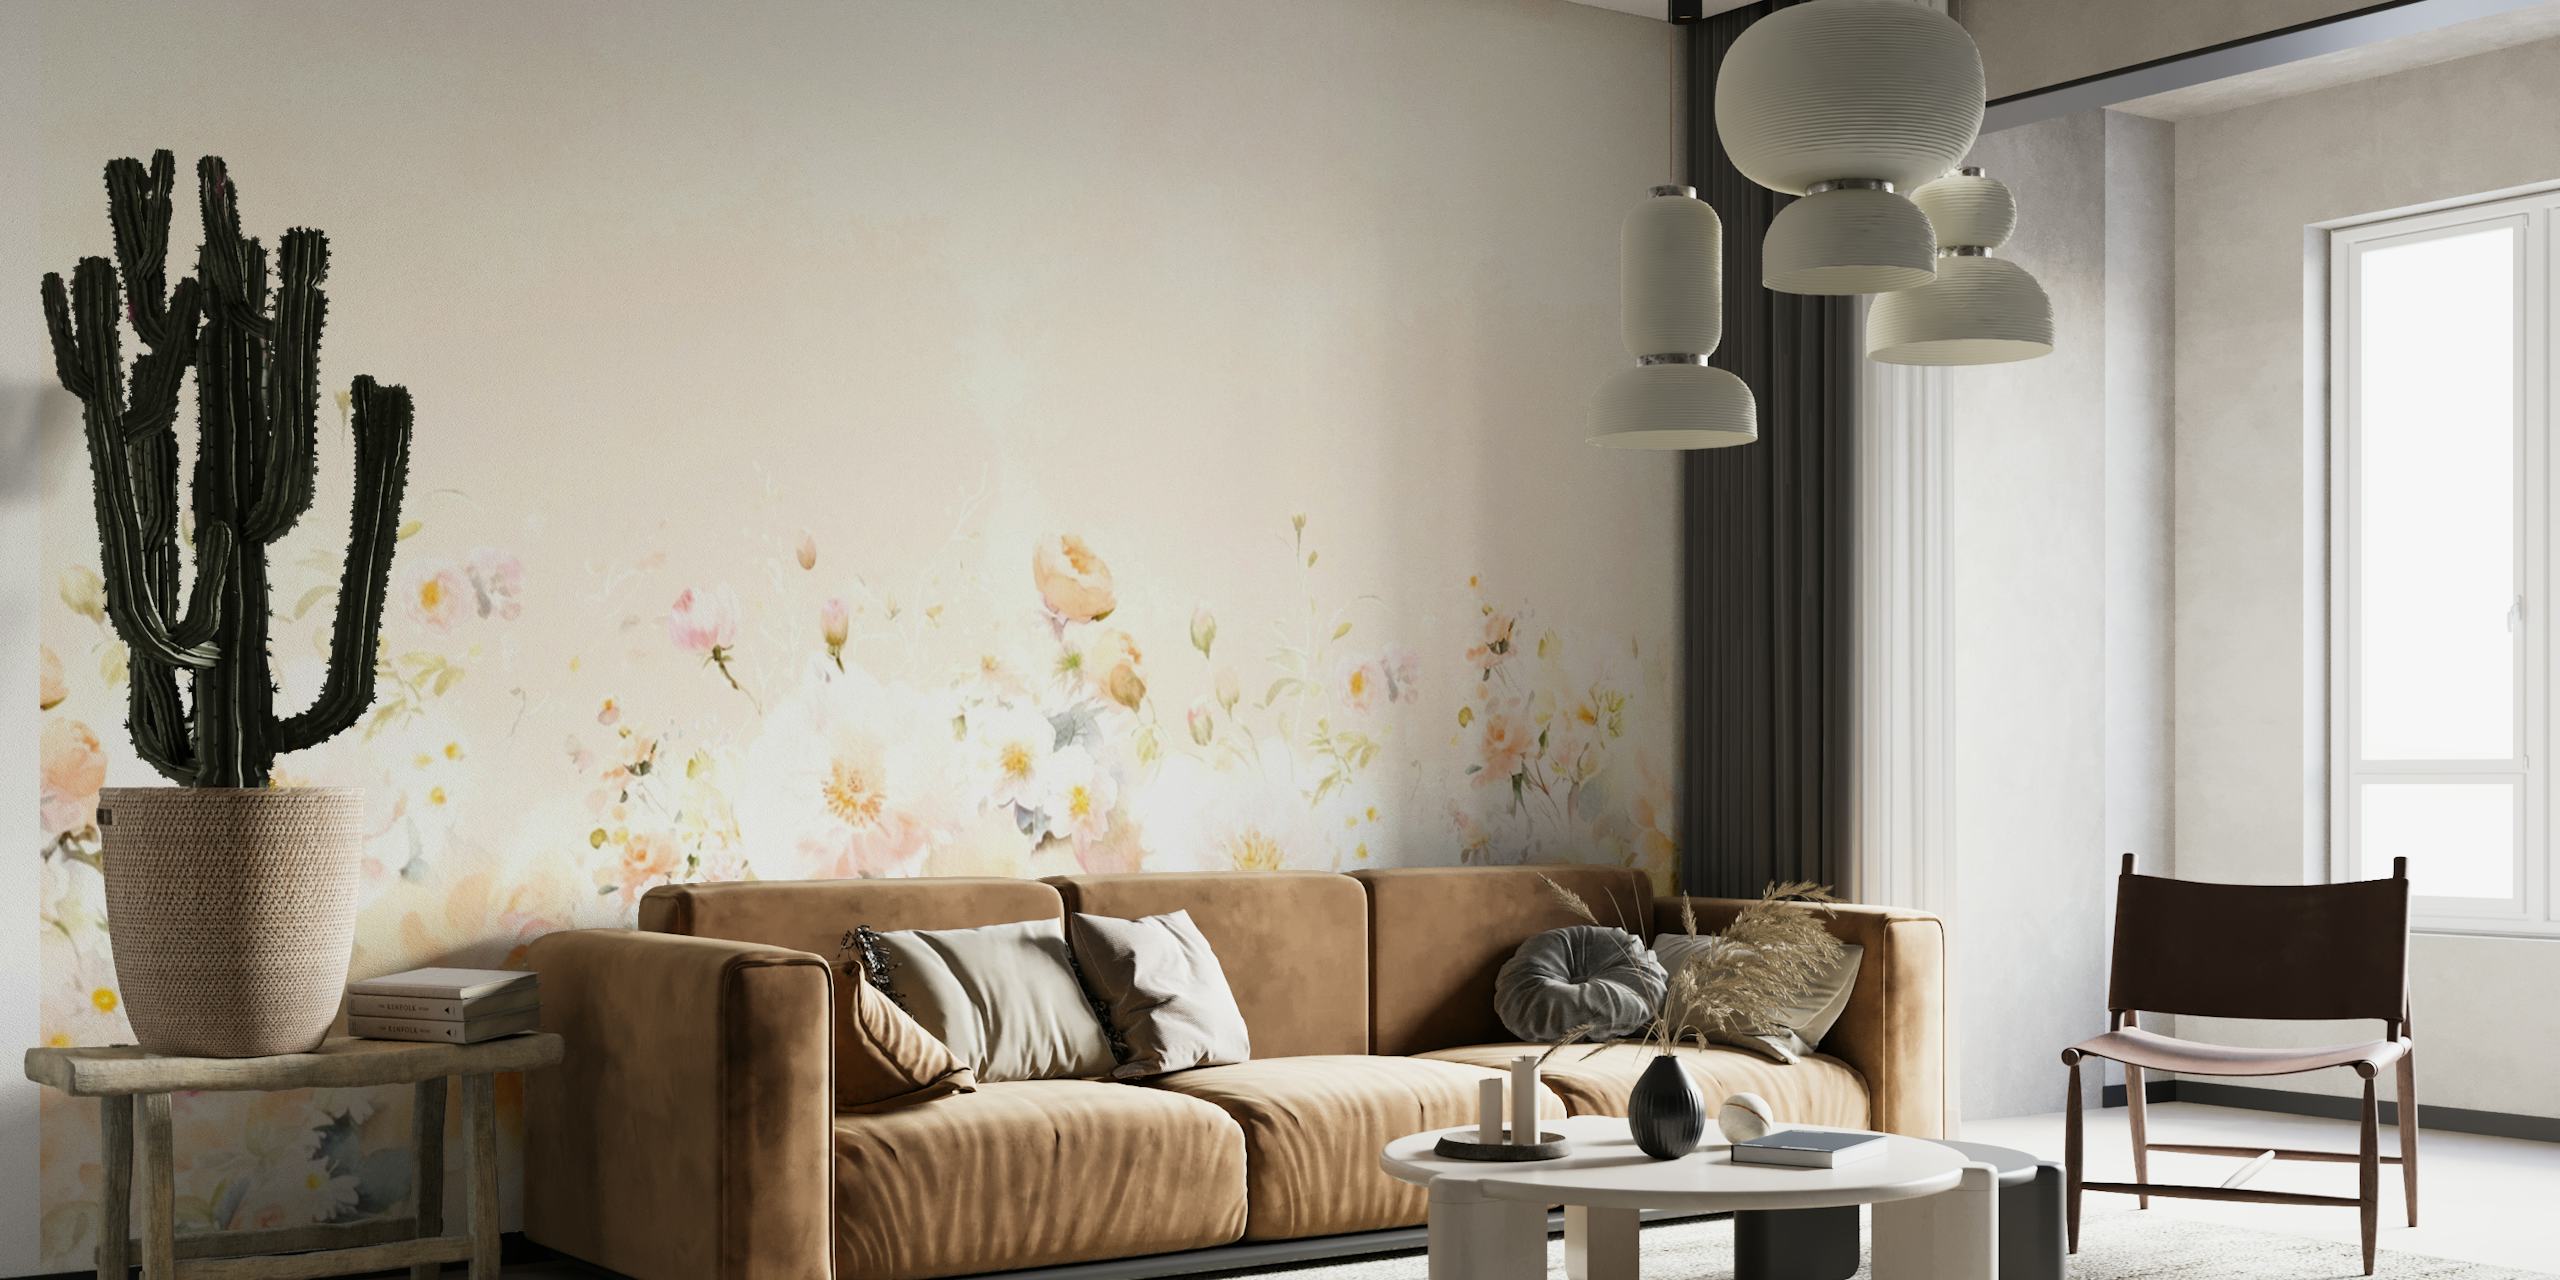 A Soft Wild Wildflower And Rose Meadow papel pintado